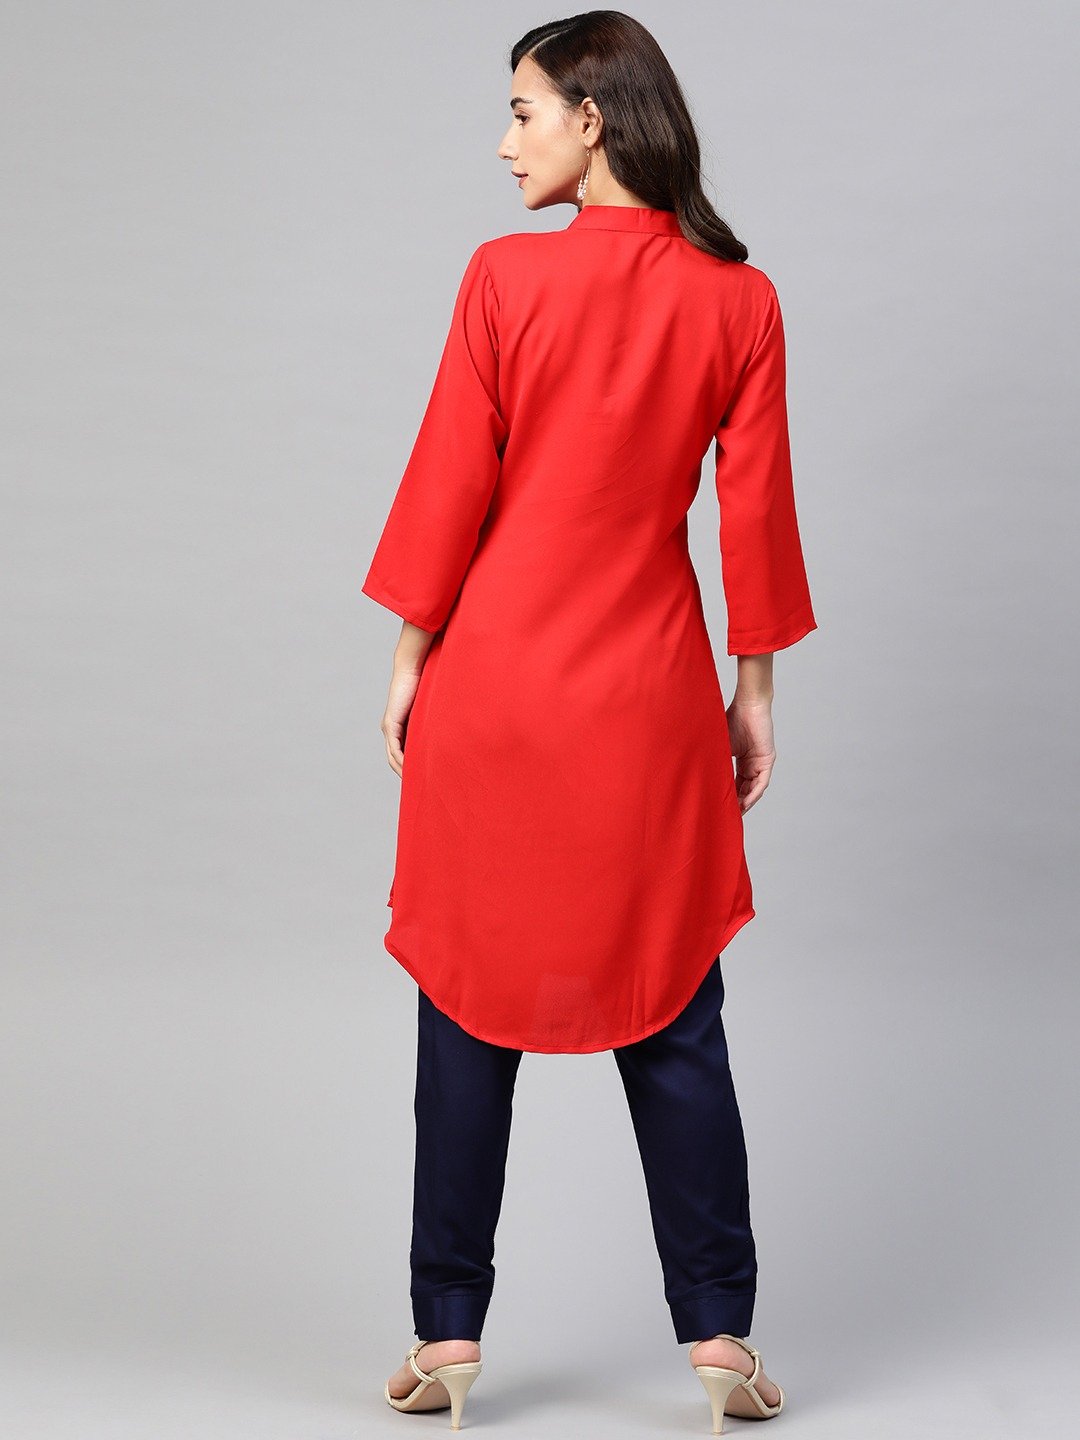 Women's Red & Navy Blue Solid A-line Kurta - Jompers